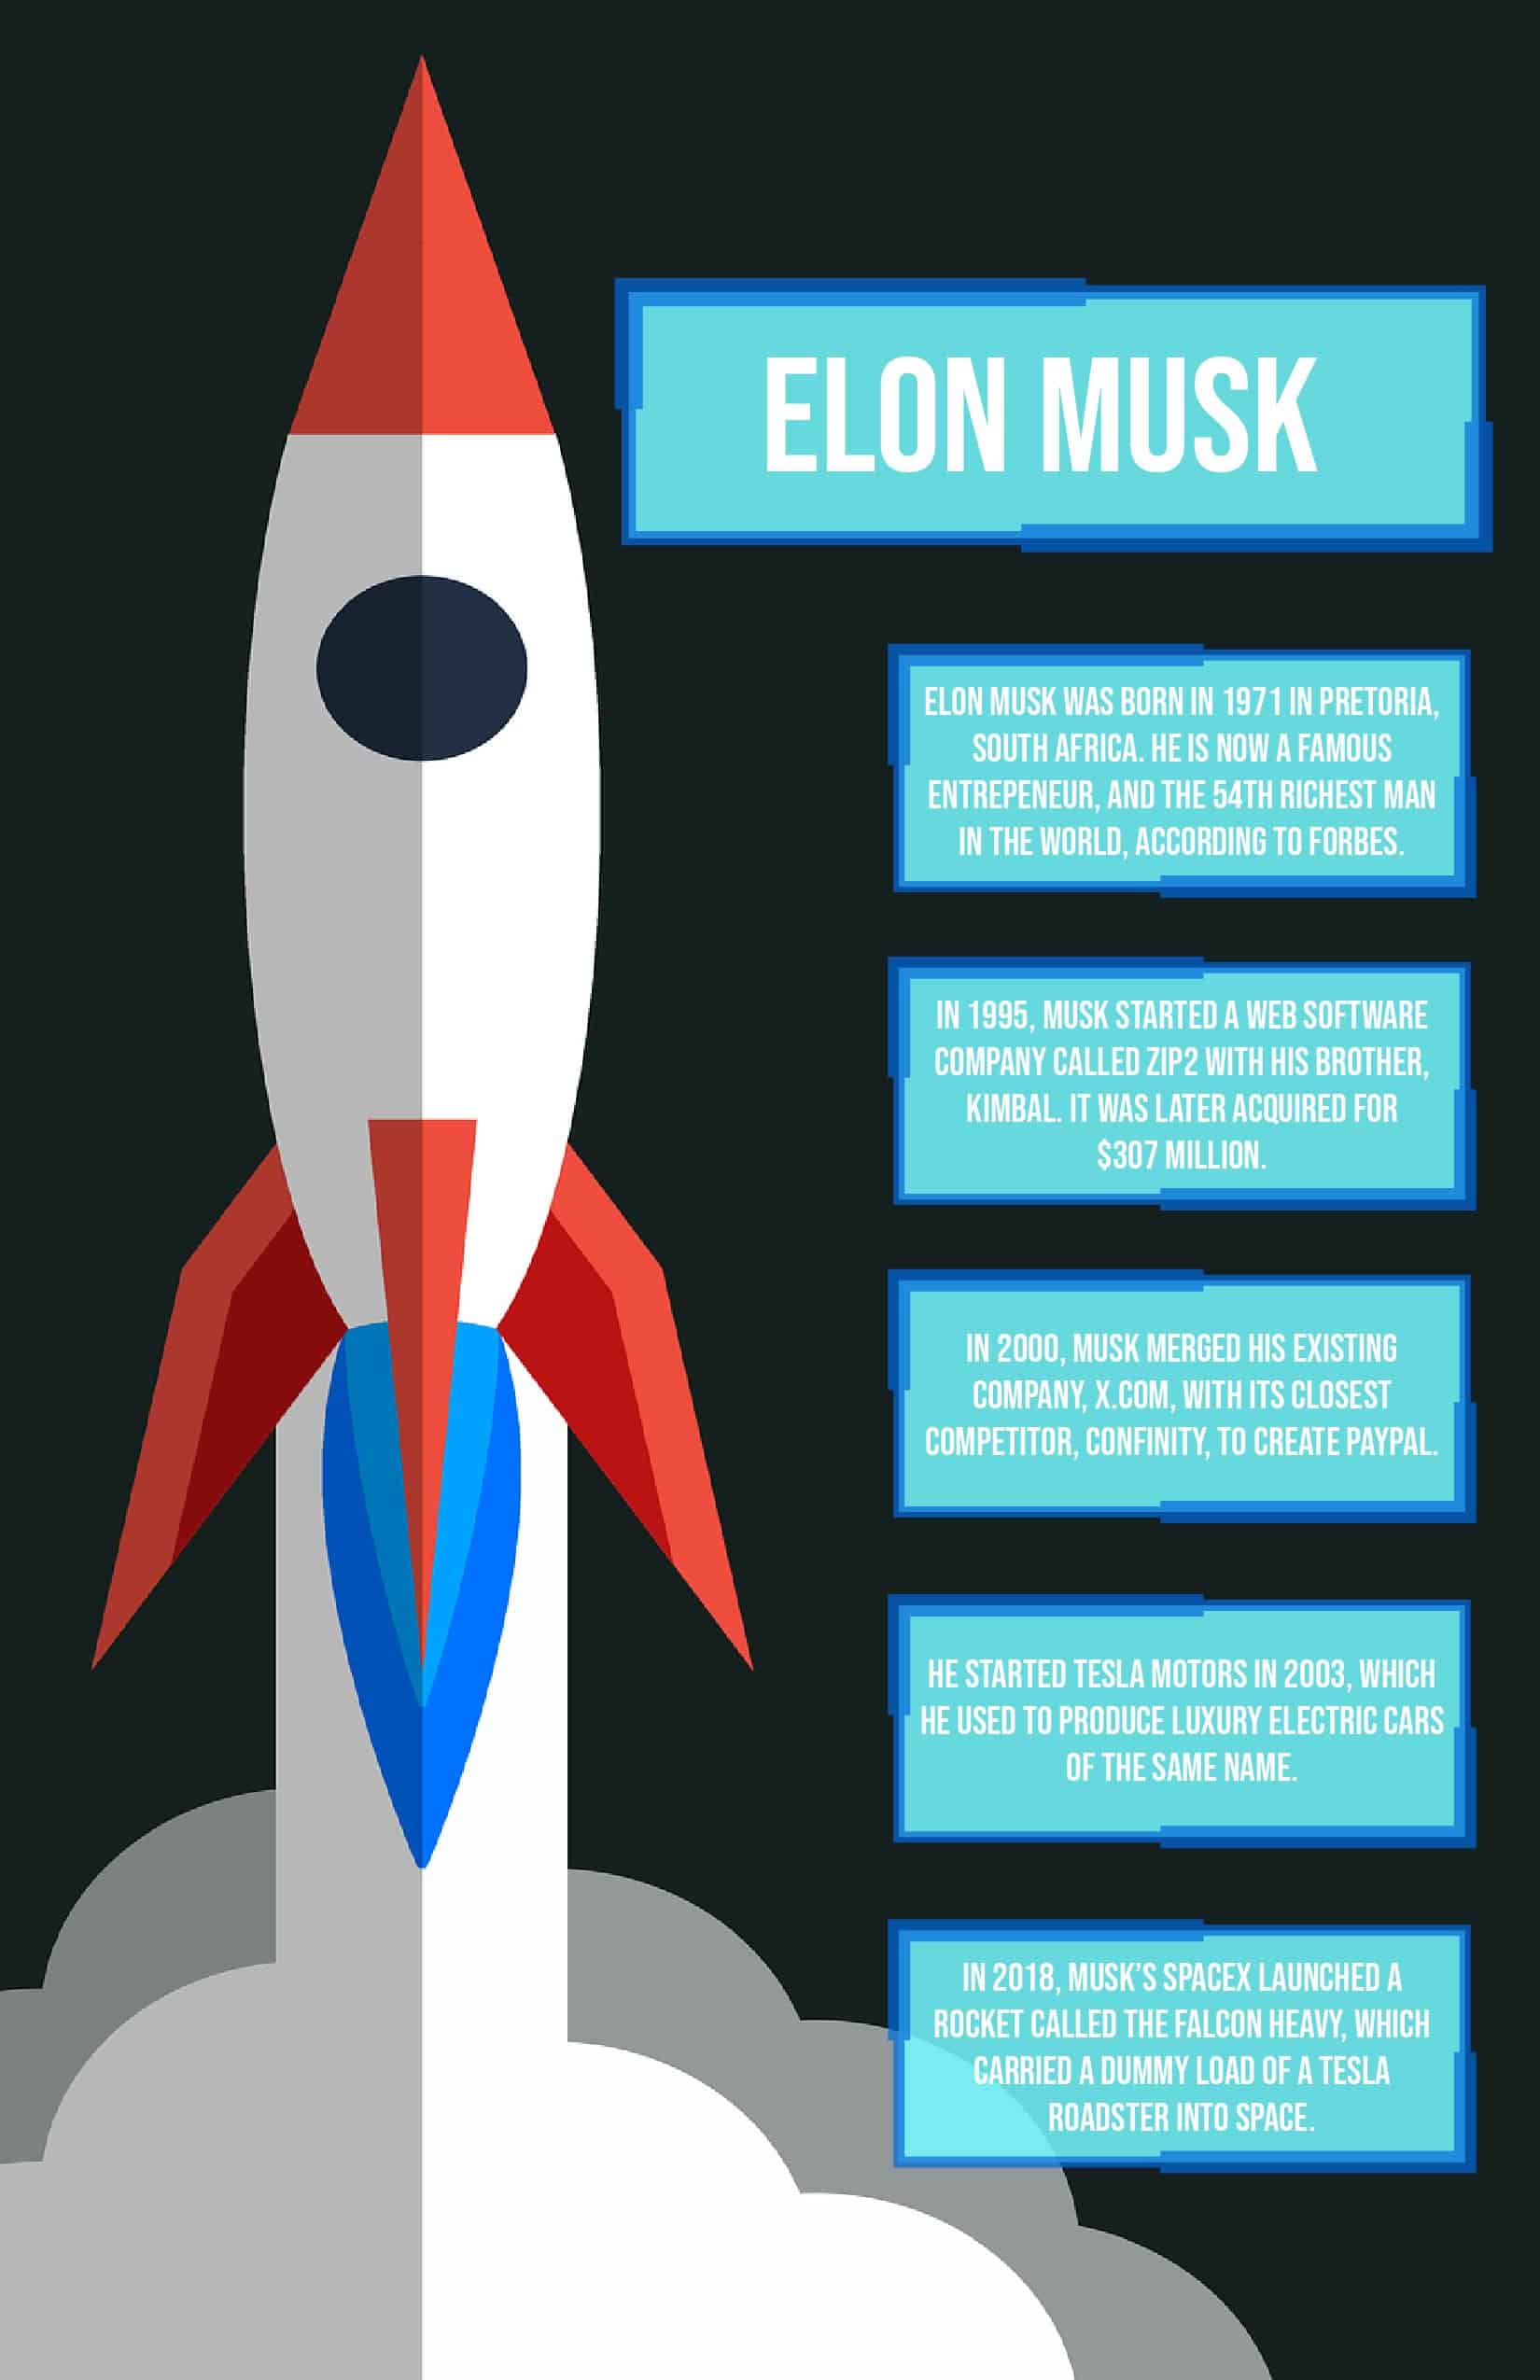 Facts about Elon Musk.